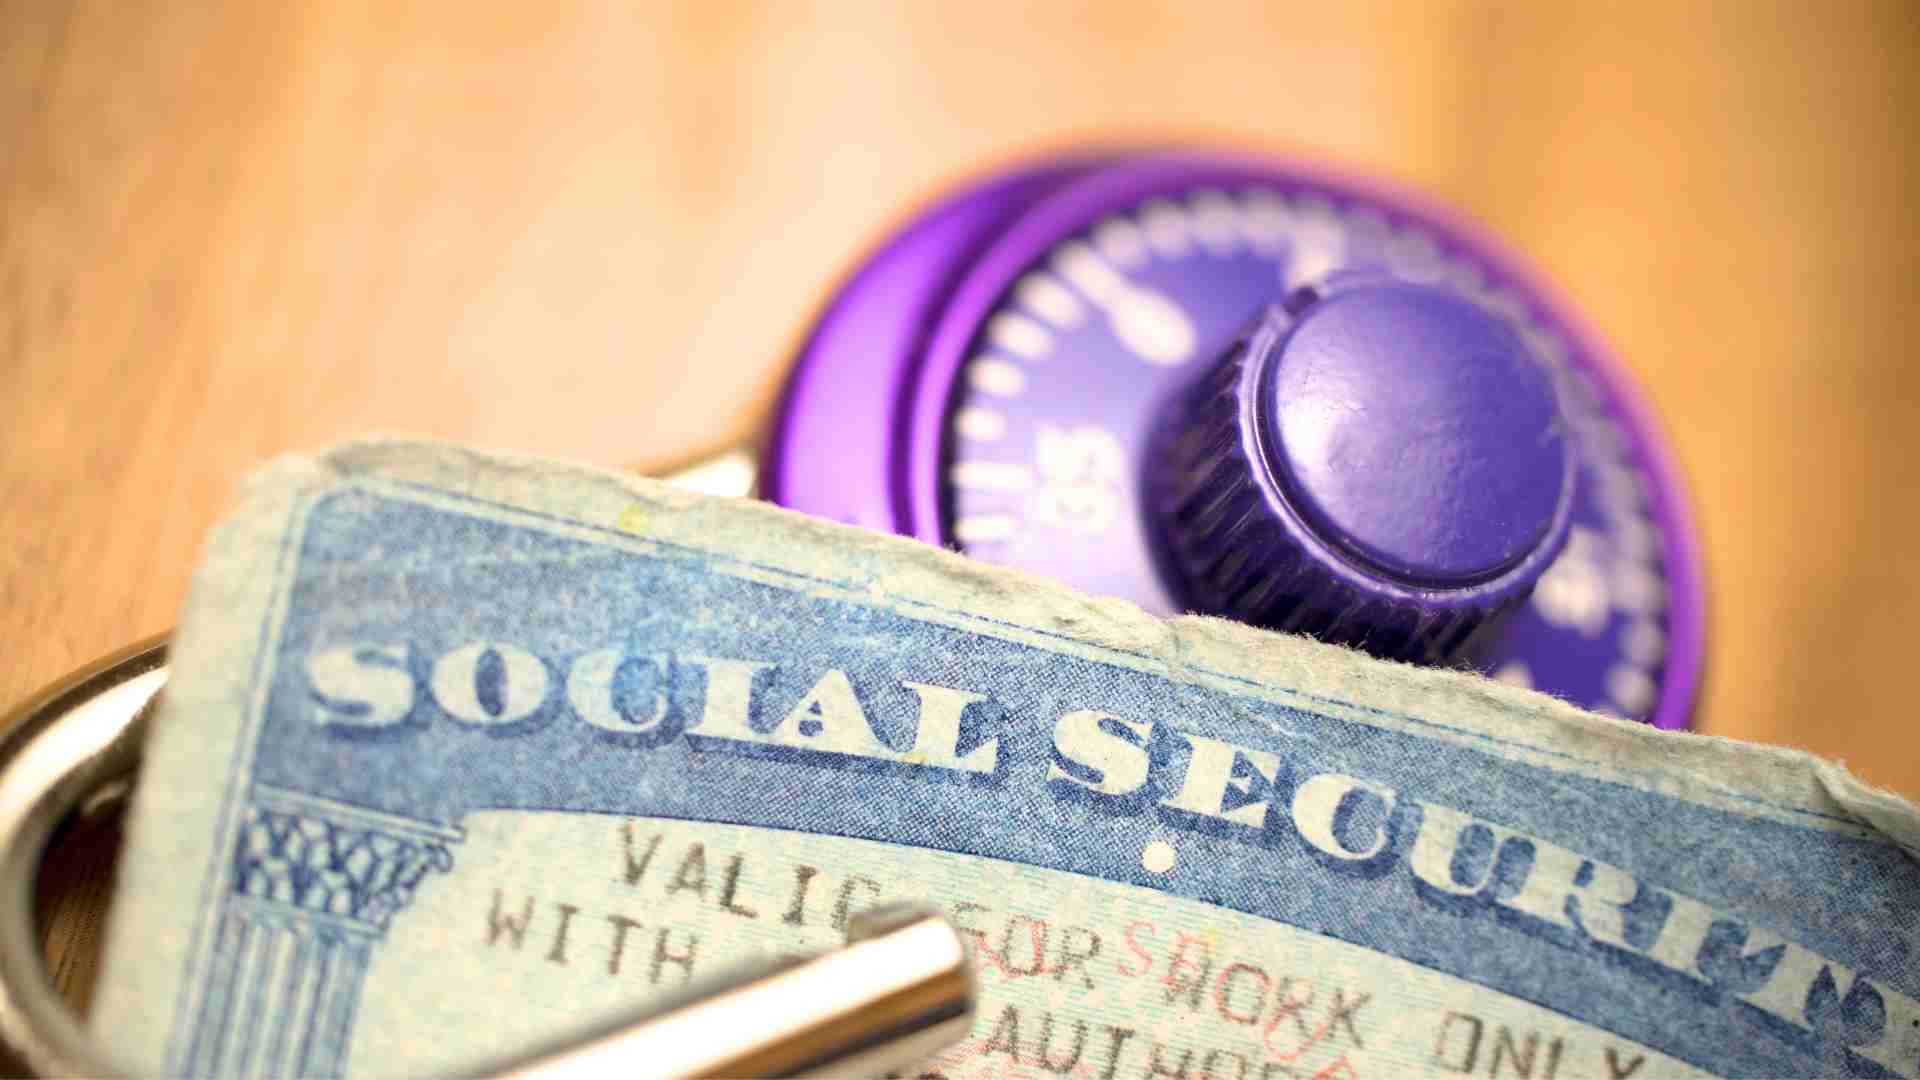 Social Security explains how to check your eligibility for payments